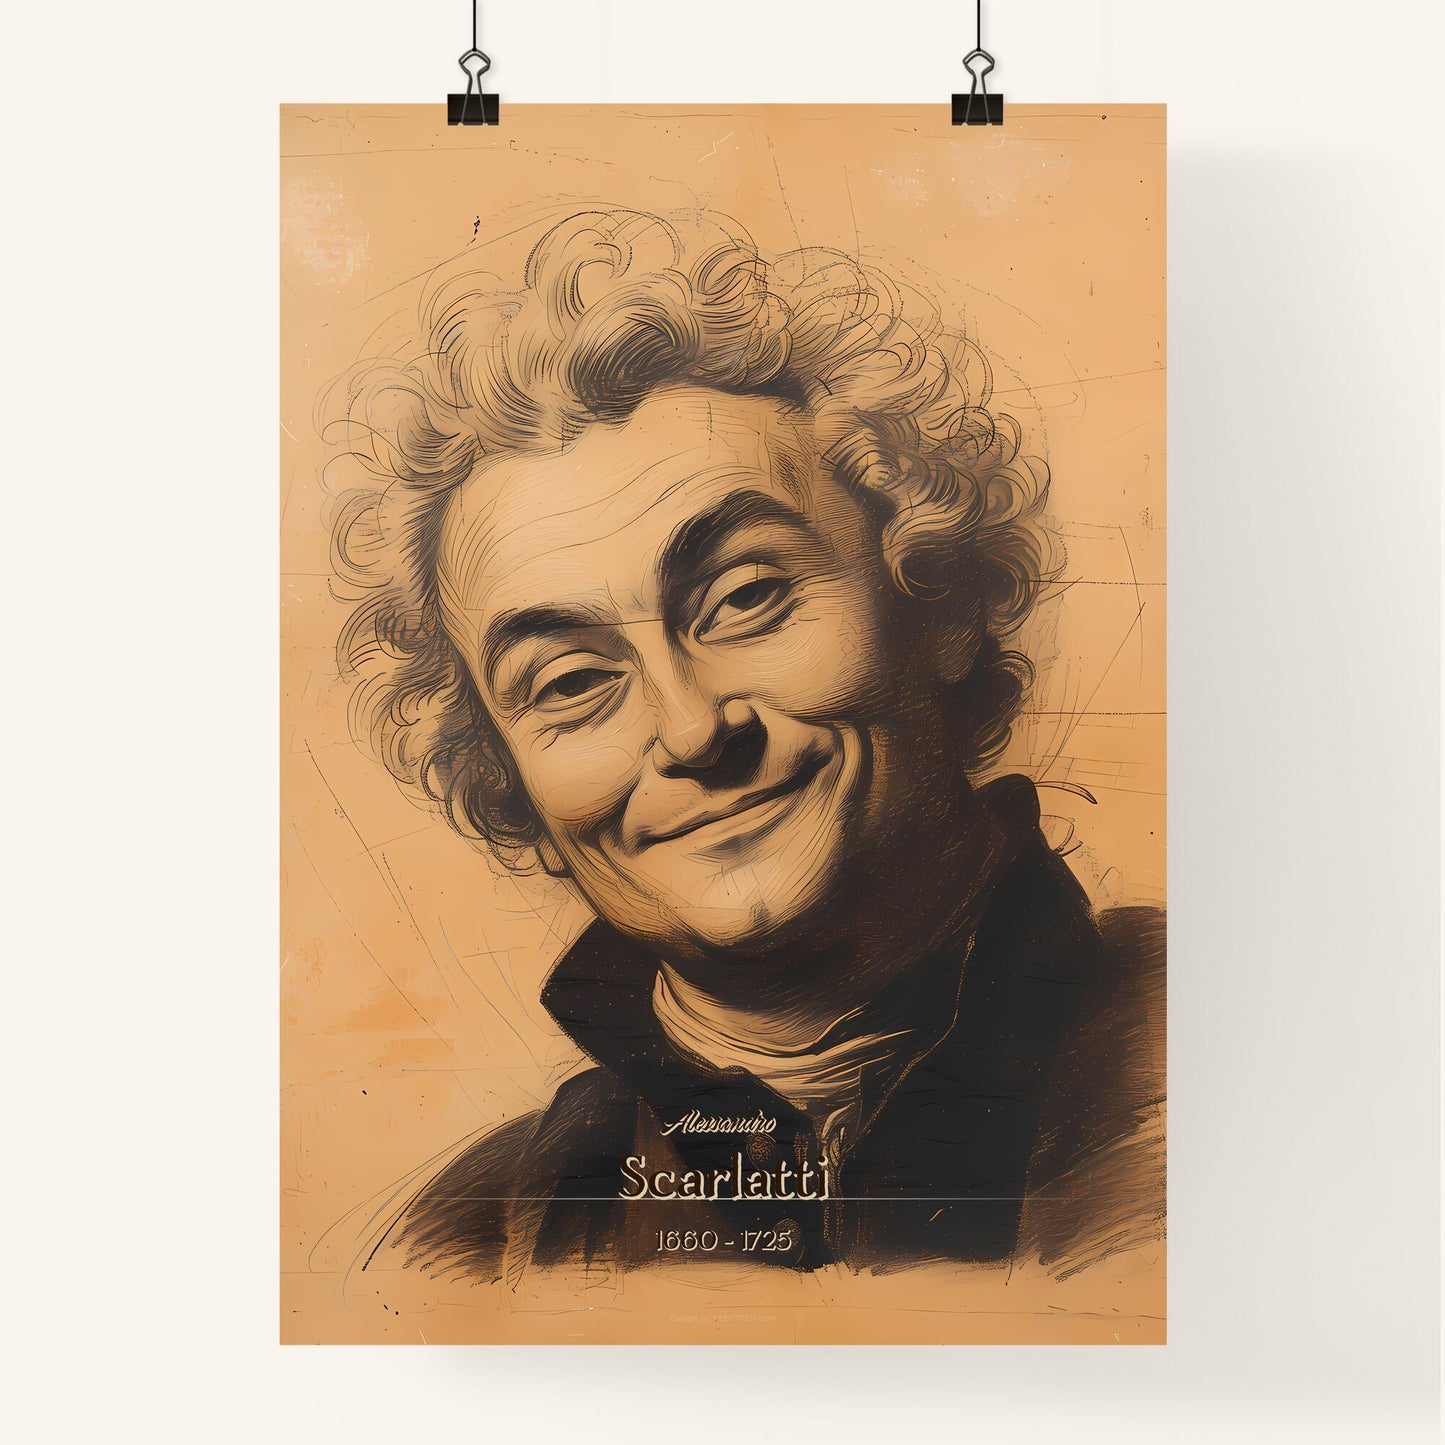 Alessandro, Scarlatti, 1660 - 1725, A Poster of a drawing of a man smiling Default Title